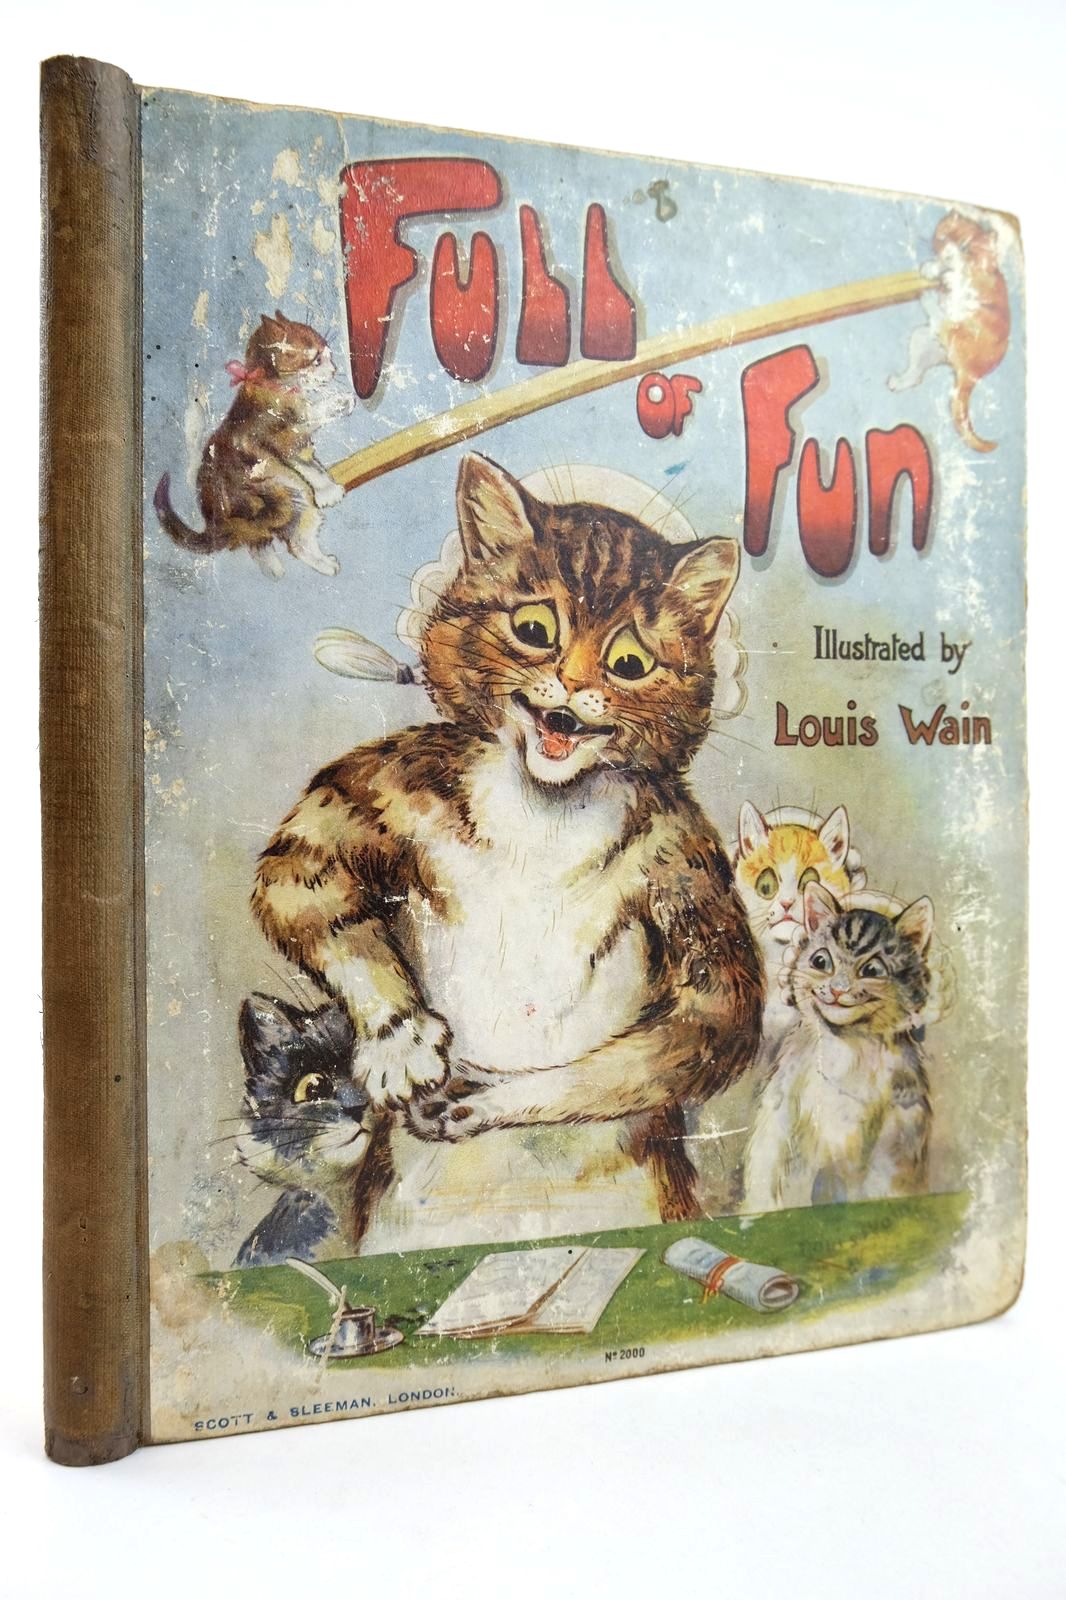 Photo of FULL OF FUN written by Bingham, Clifton illustrated by Wain, Louis published by Scott & Sleeman (STOCK CODE: 2132546)  for sale by Stella & Rose's Books